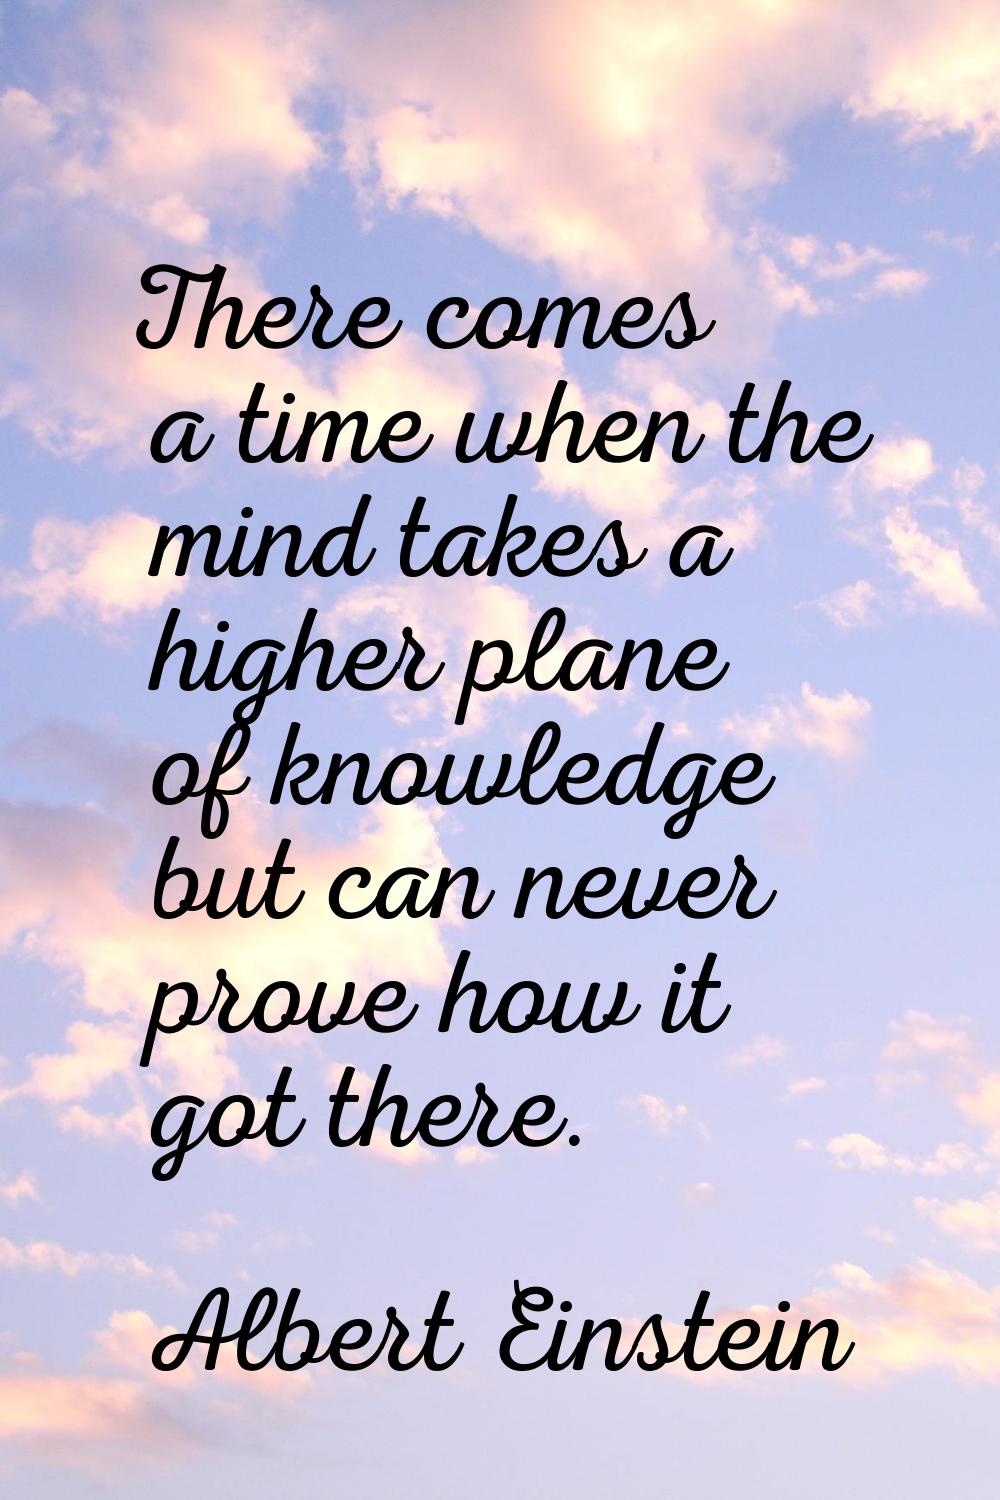 There comes a time when the mind takes a higher plane of knowledge but can never prove how it got t